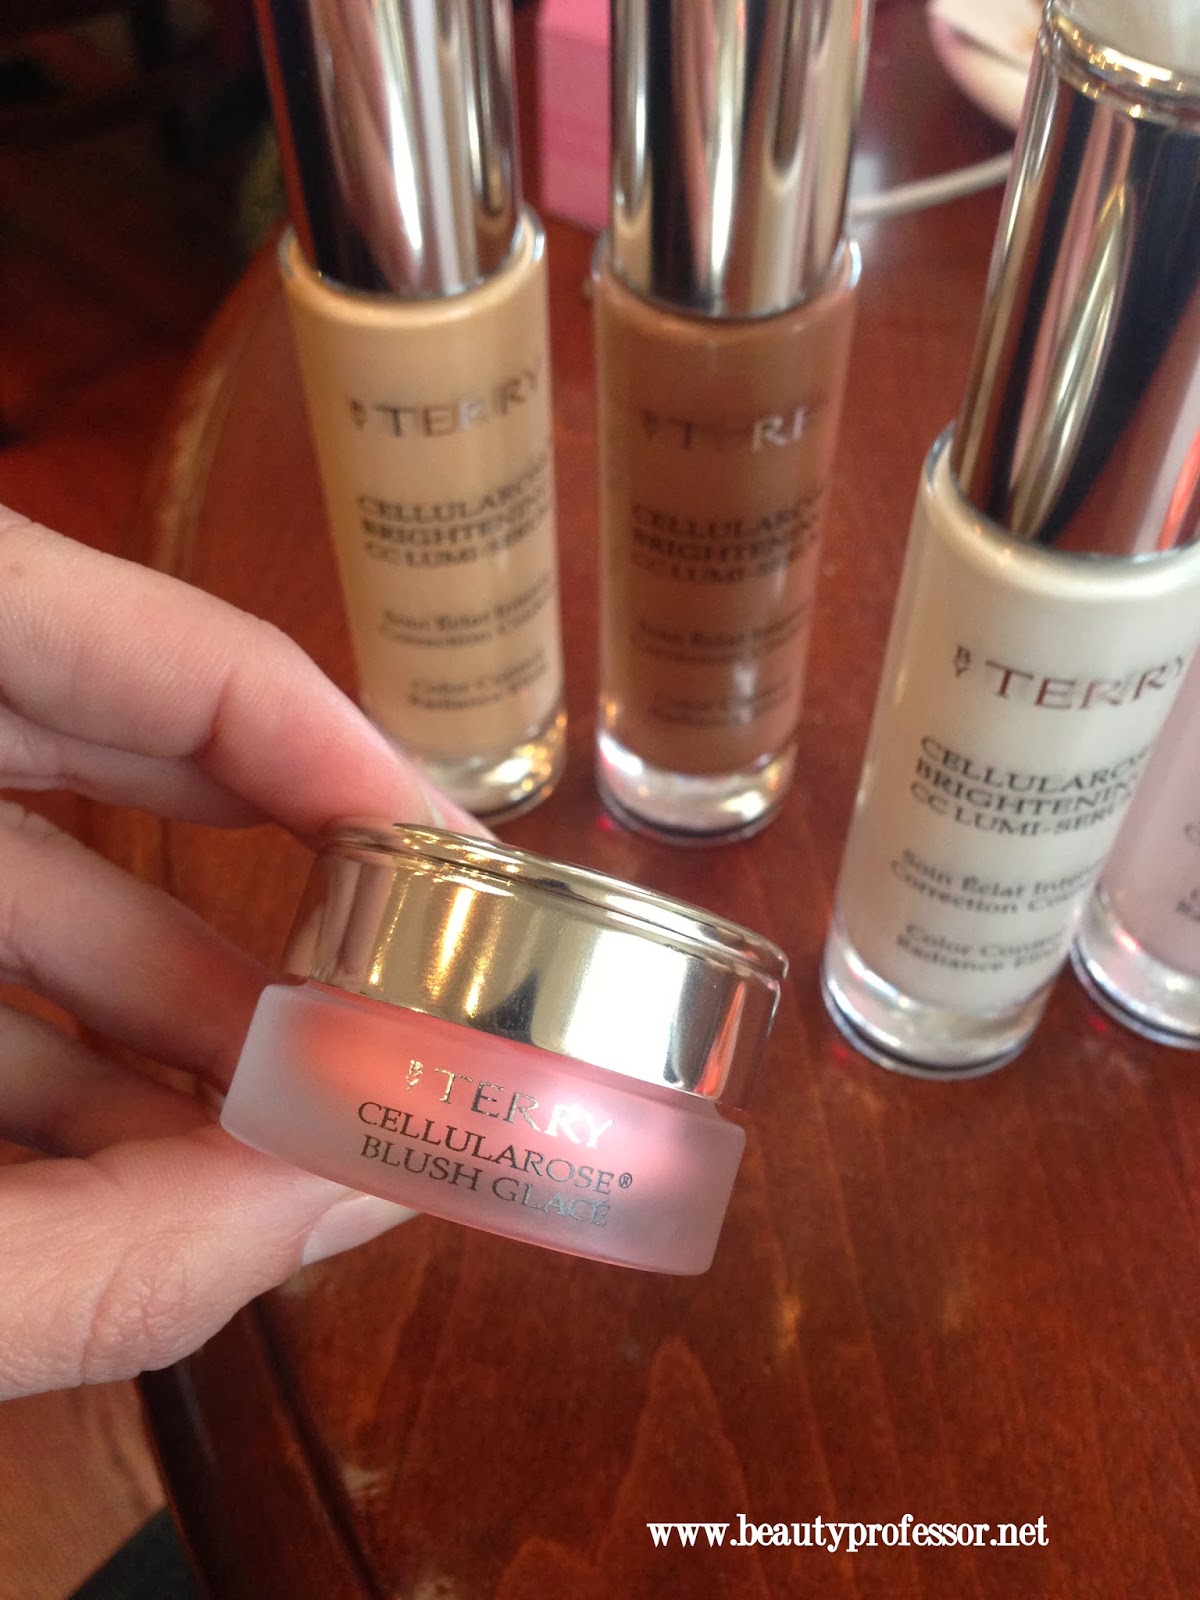 By Terry Spring 2014 CollectionPreview + Swatches!, Beauty Professor